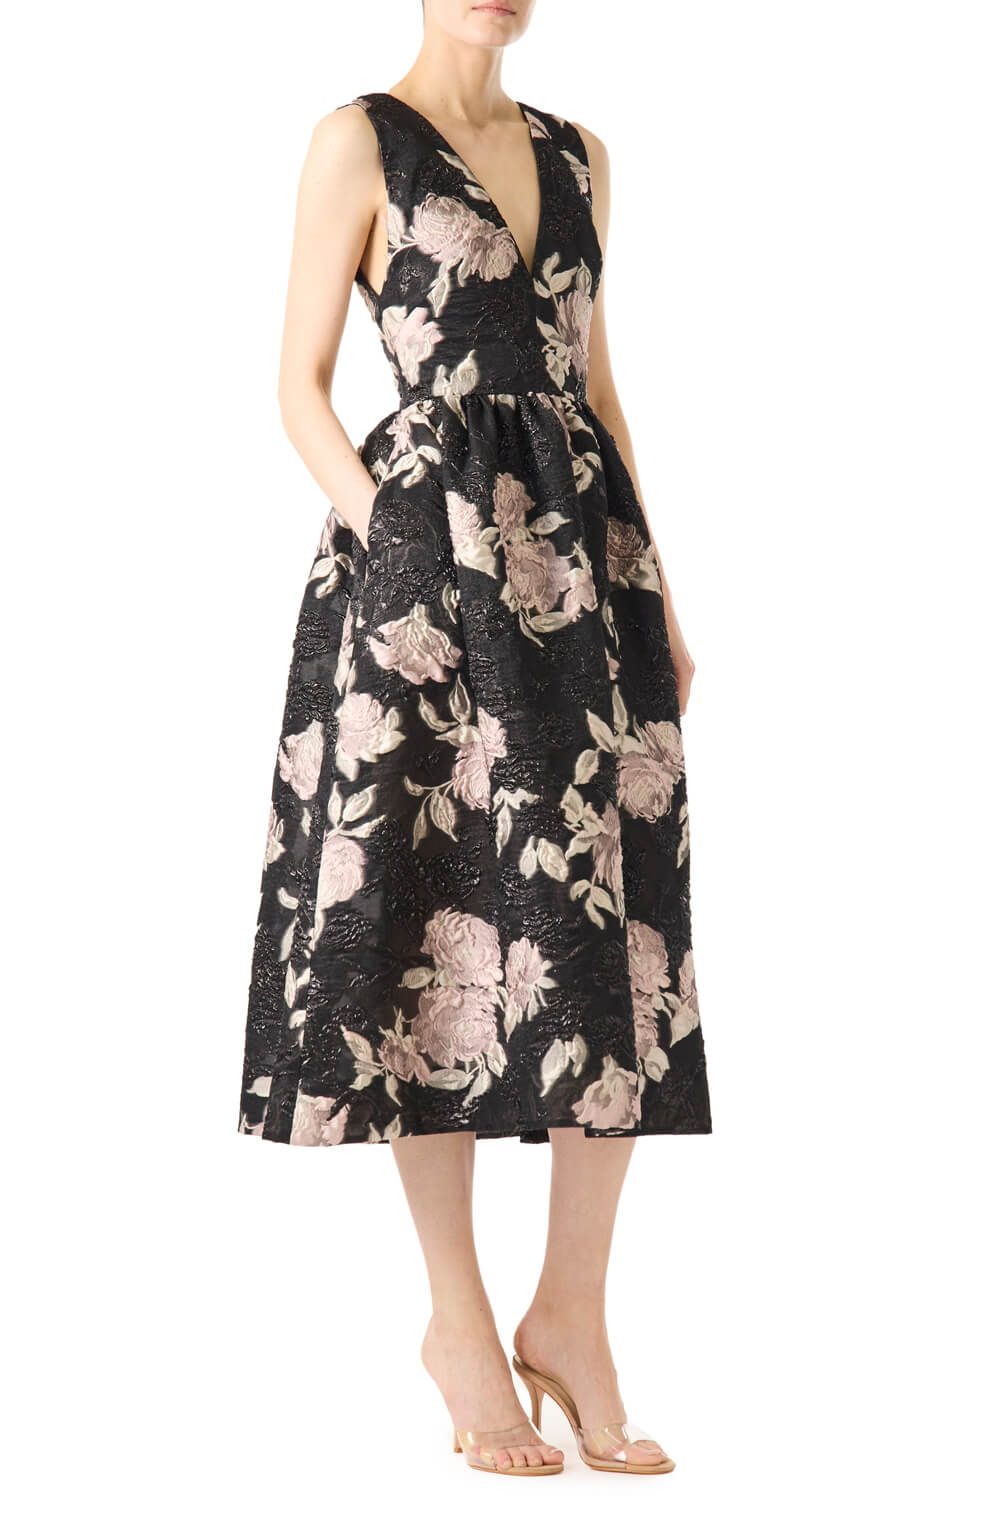 Metallic Floral Print Jacquard Gown With Off The Shoulder Neckline In